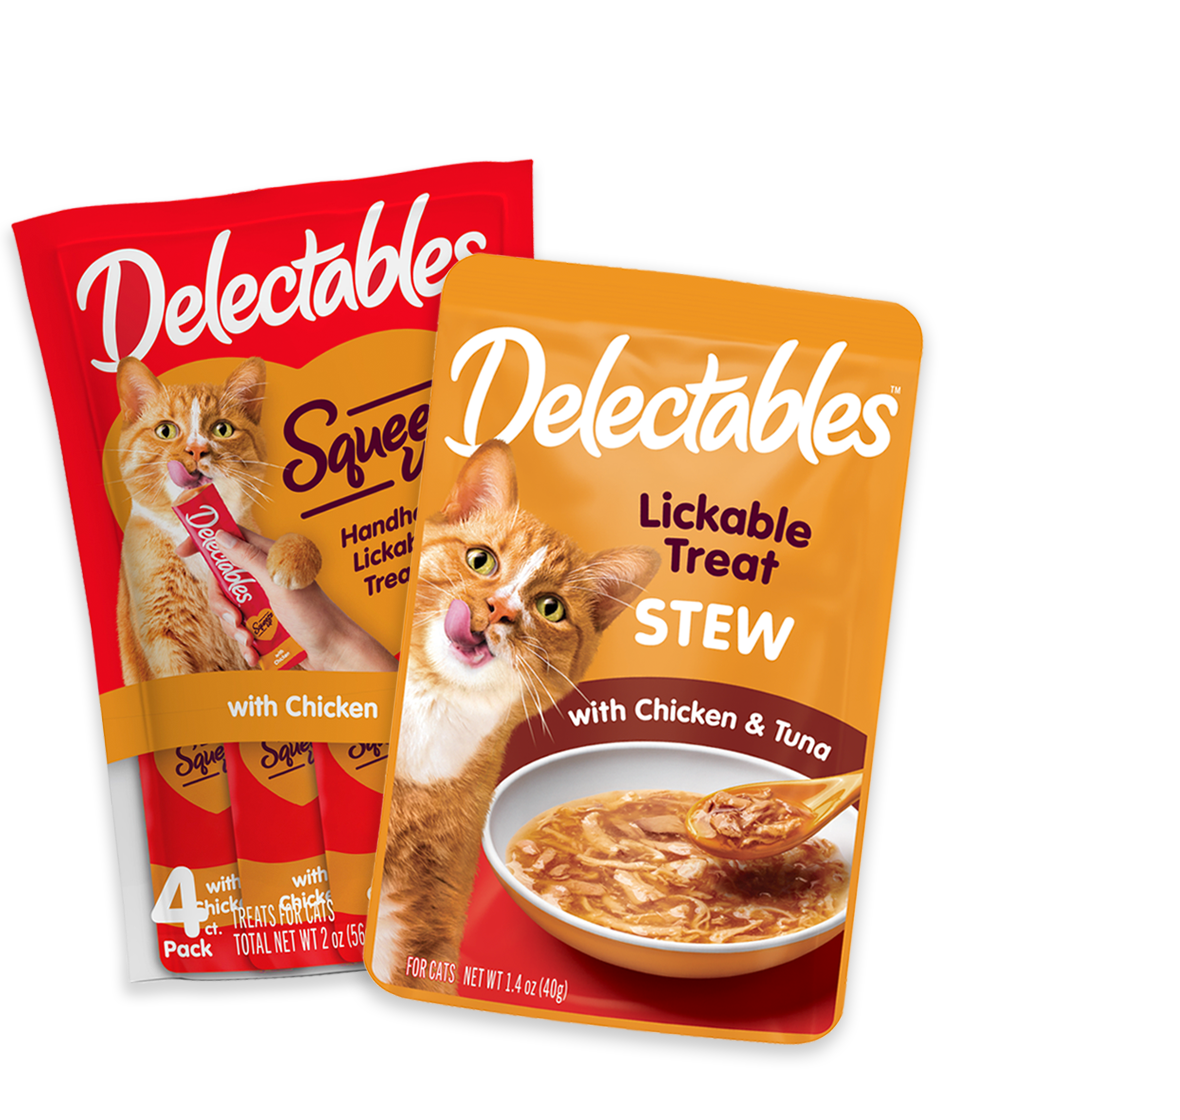 Delectables Squeeze up and Lickable treats for cats.